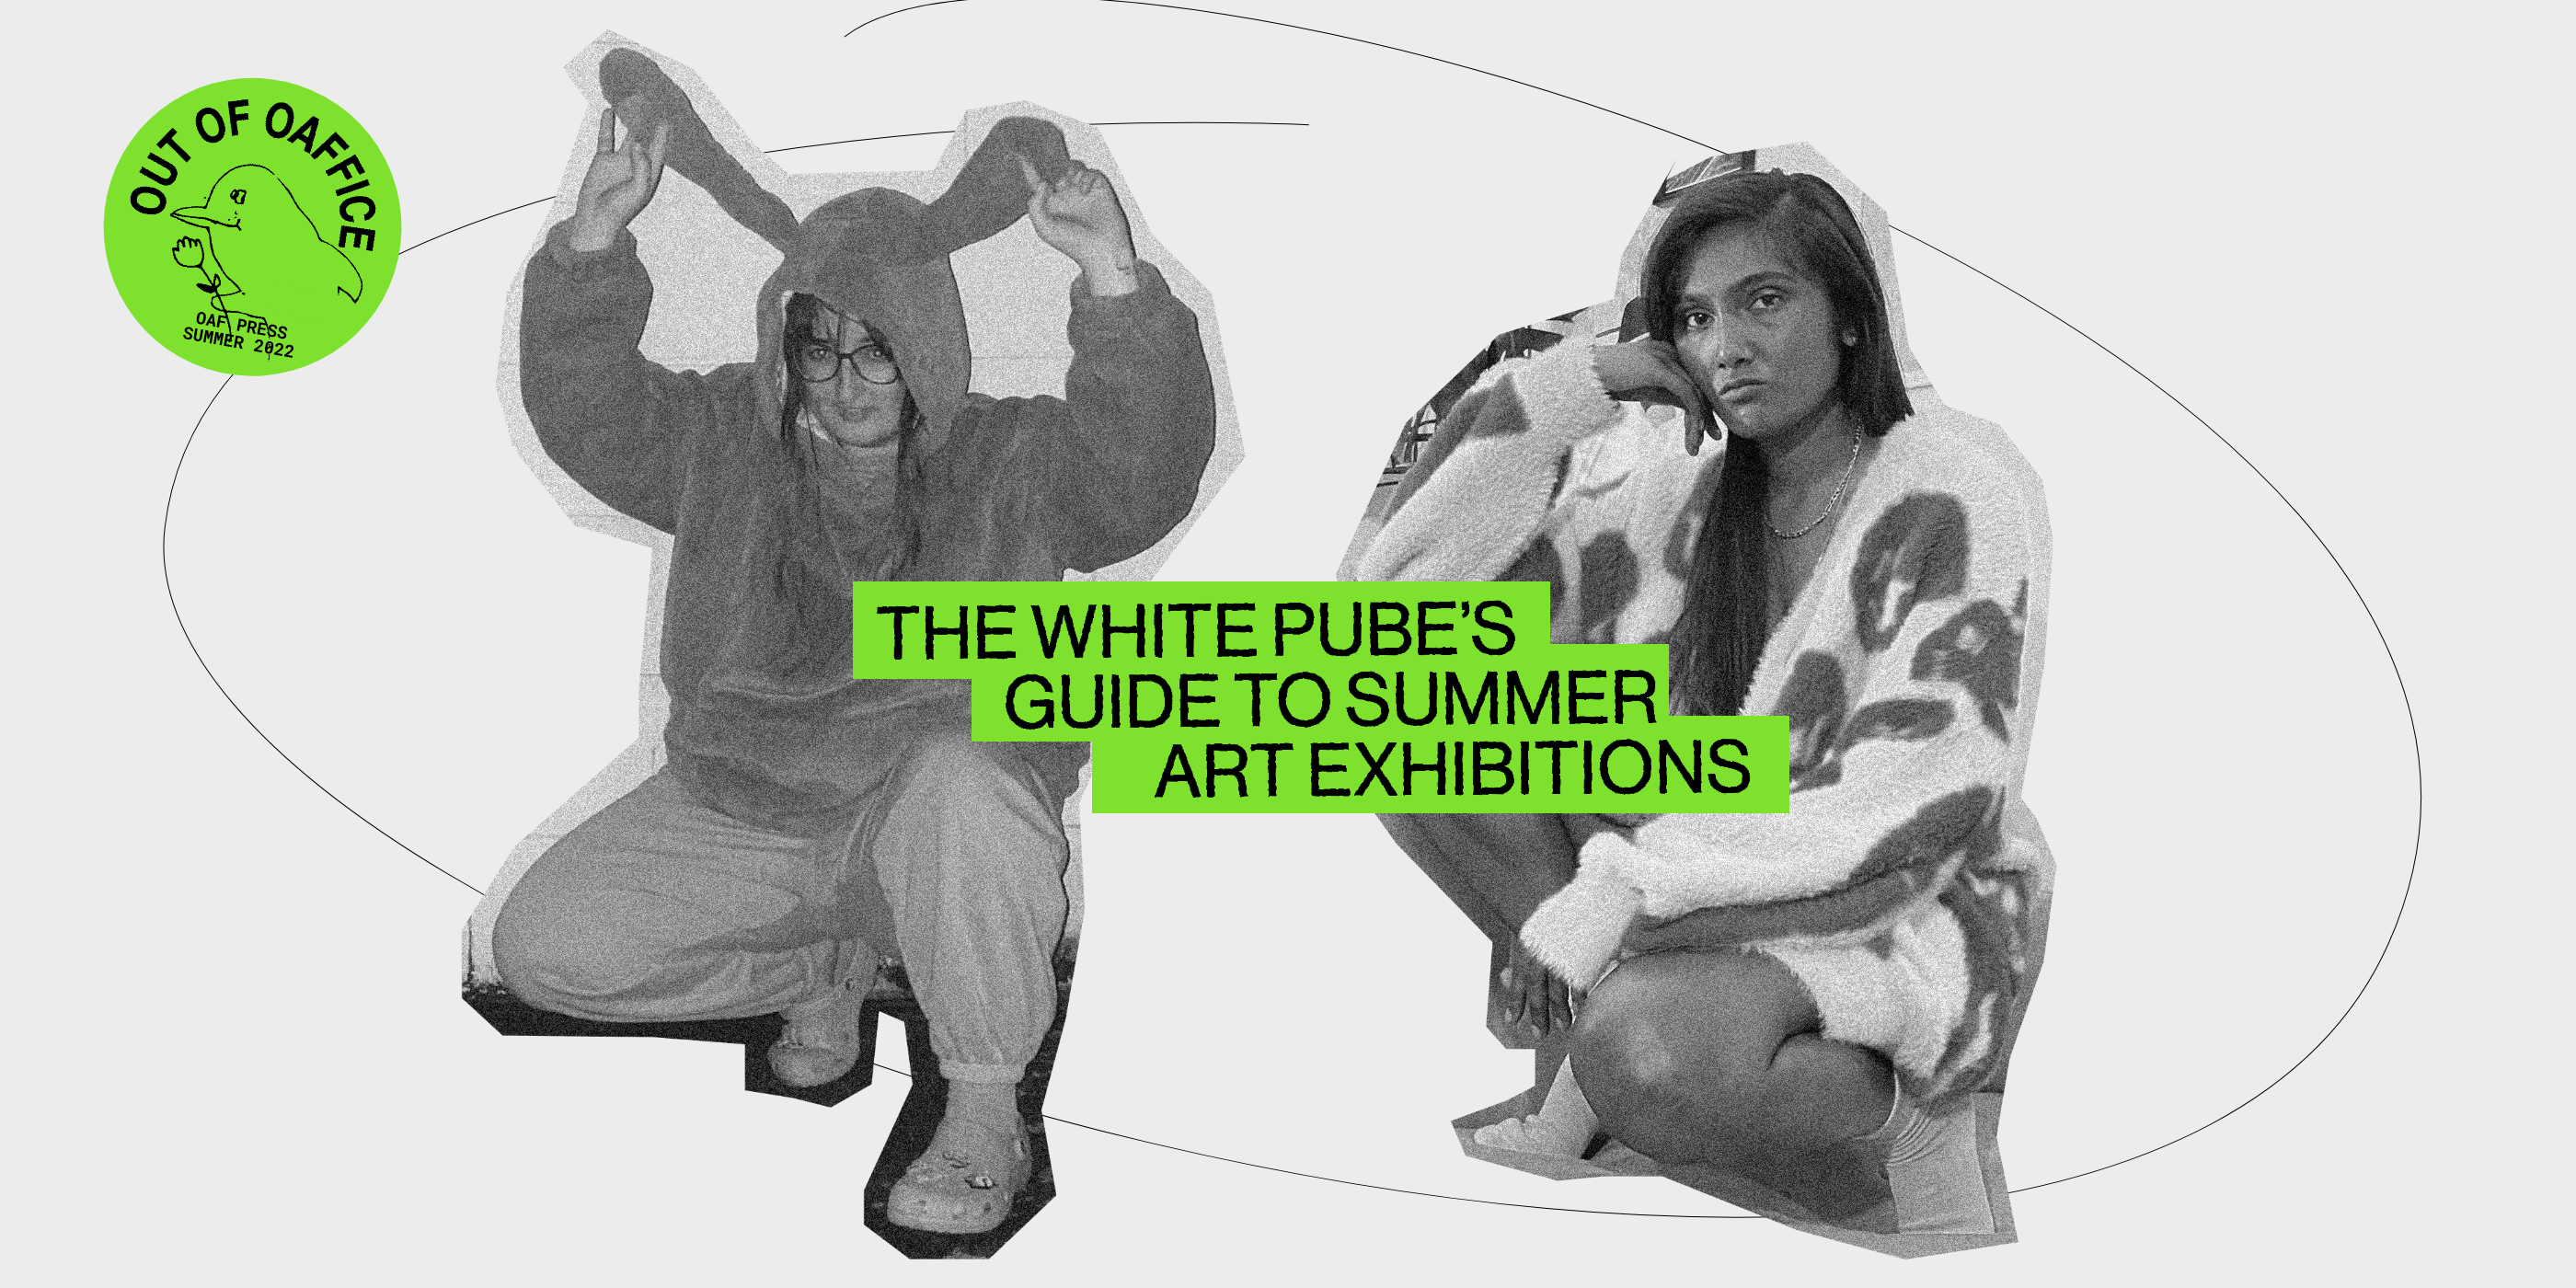 THE WHITE PUBE’S GUIDE TO SUMMER ART EXHIBITIONS